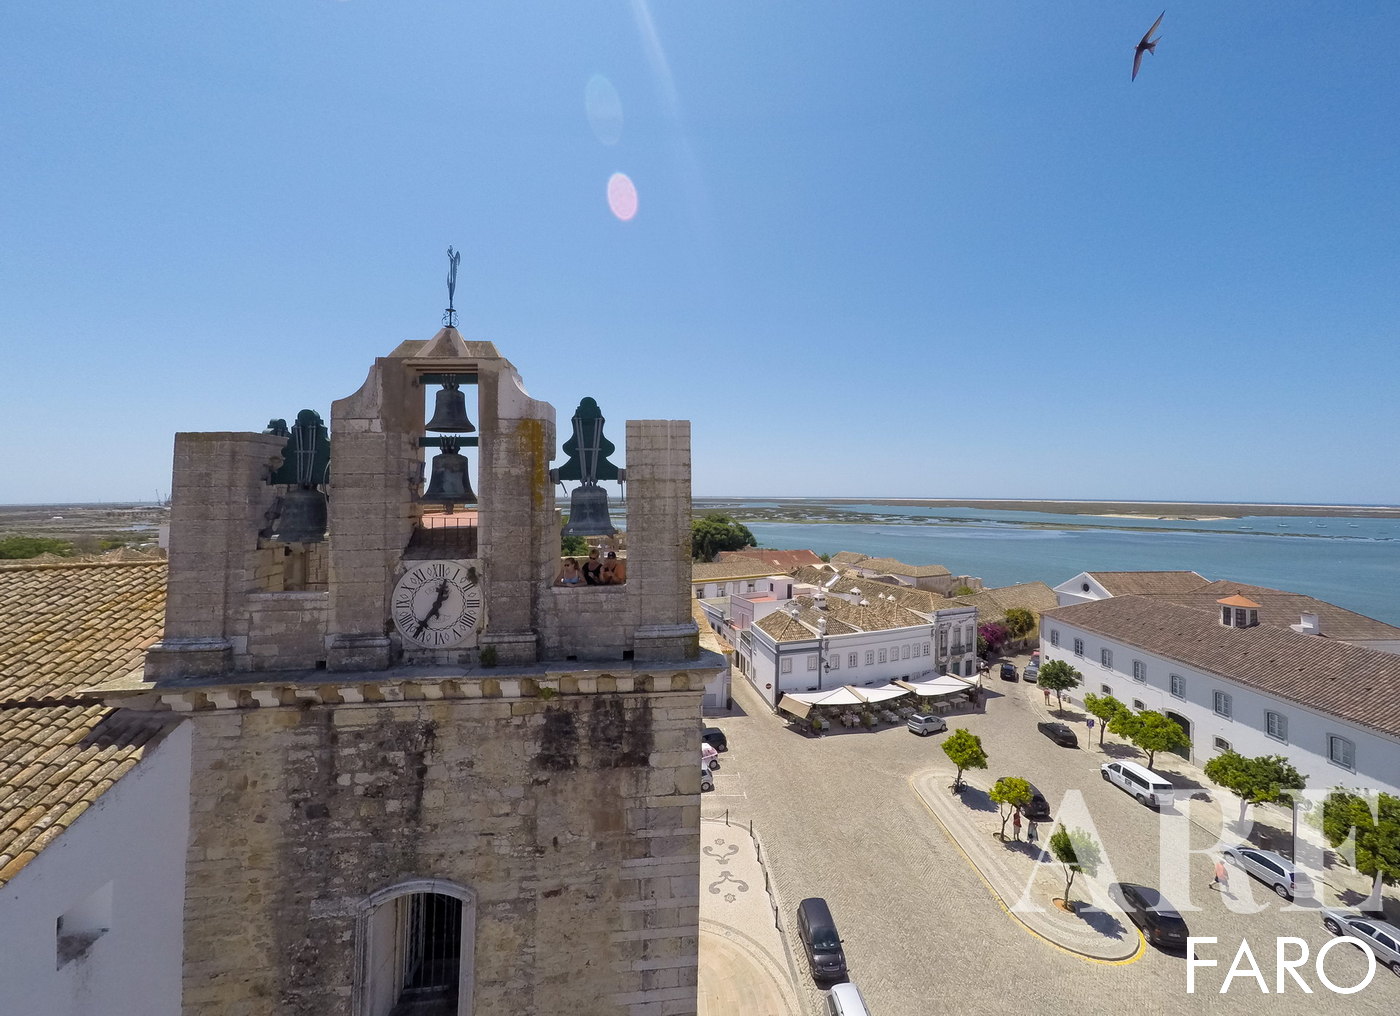 Church of Santa Maria, Faro Cathedral,</strong> located in the old city of Faro, one of the must-visit points. From the top of the Cathedral, we can observe fantastic panoramic views over the city;